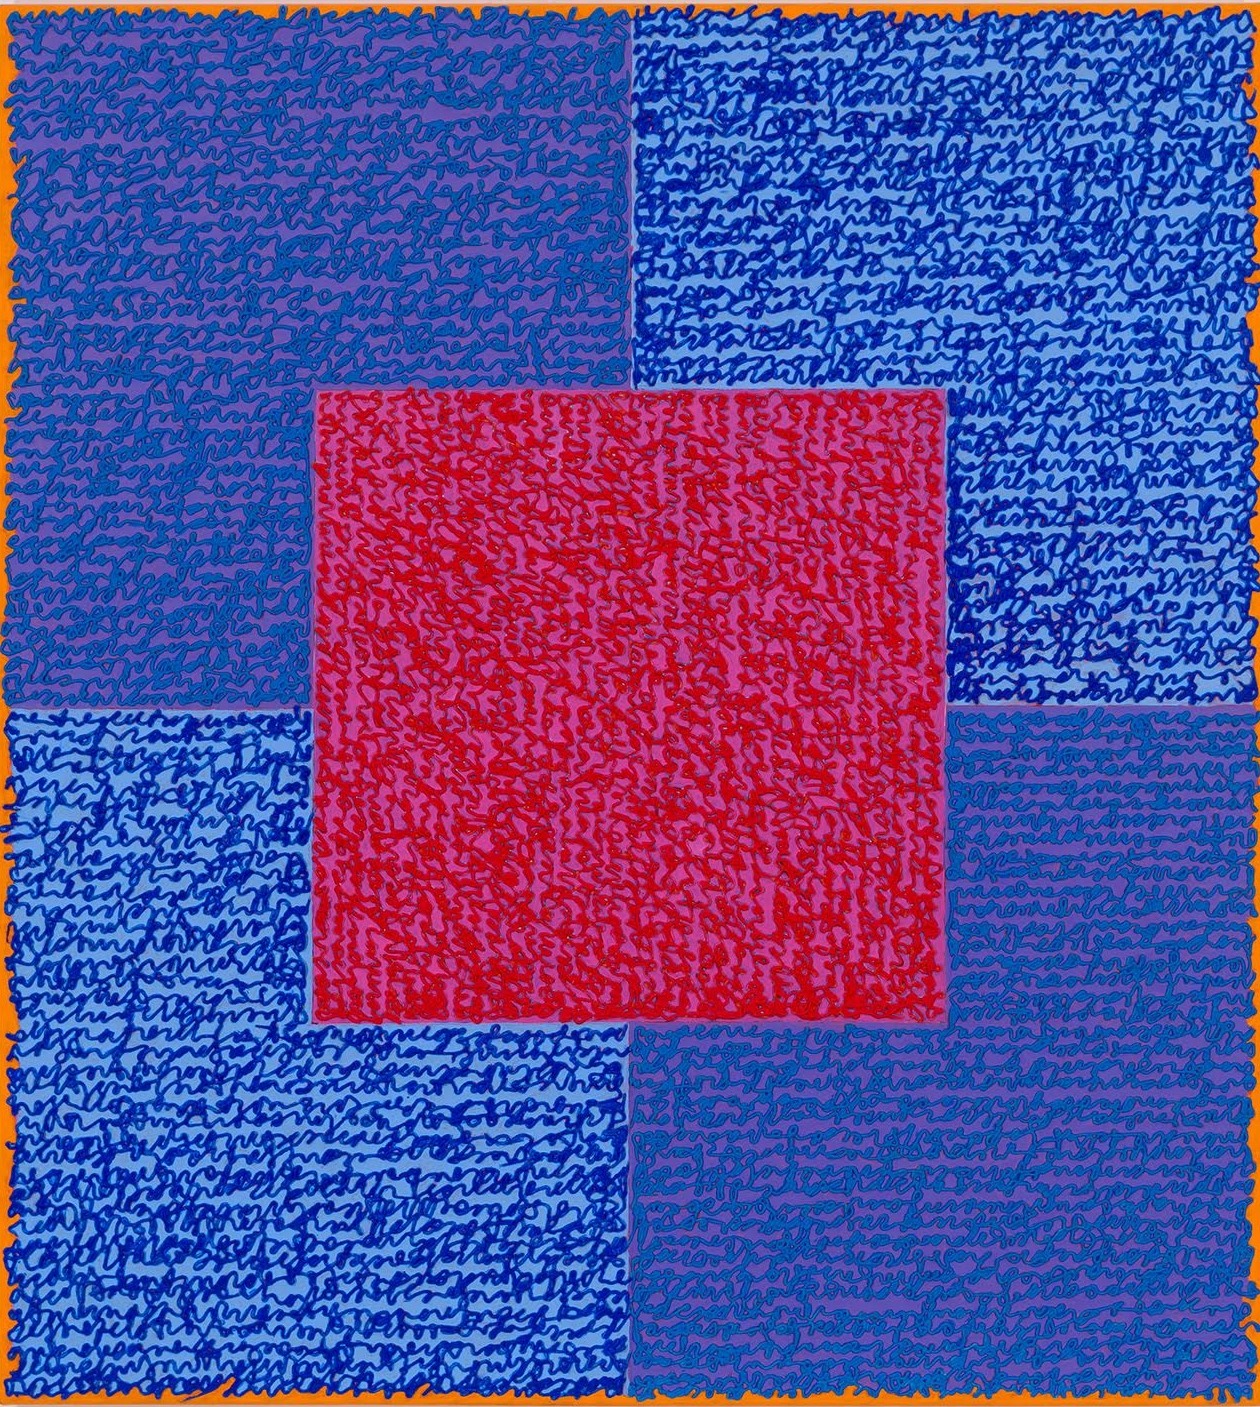 Louise P. Sloane, Blues, 2015 , 40 x 34 inches, Acrylic paint and pastes on aluminum panel, SOLD,  four squares and a central square (pink and blue) with personal text written over the squares in blue and pink to create three dimensional texture. Louise P. Sloane has been creating abstract paintings since 1974, embracing minimalist techniques and the beauty of color and texture.